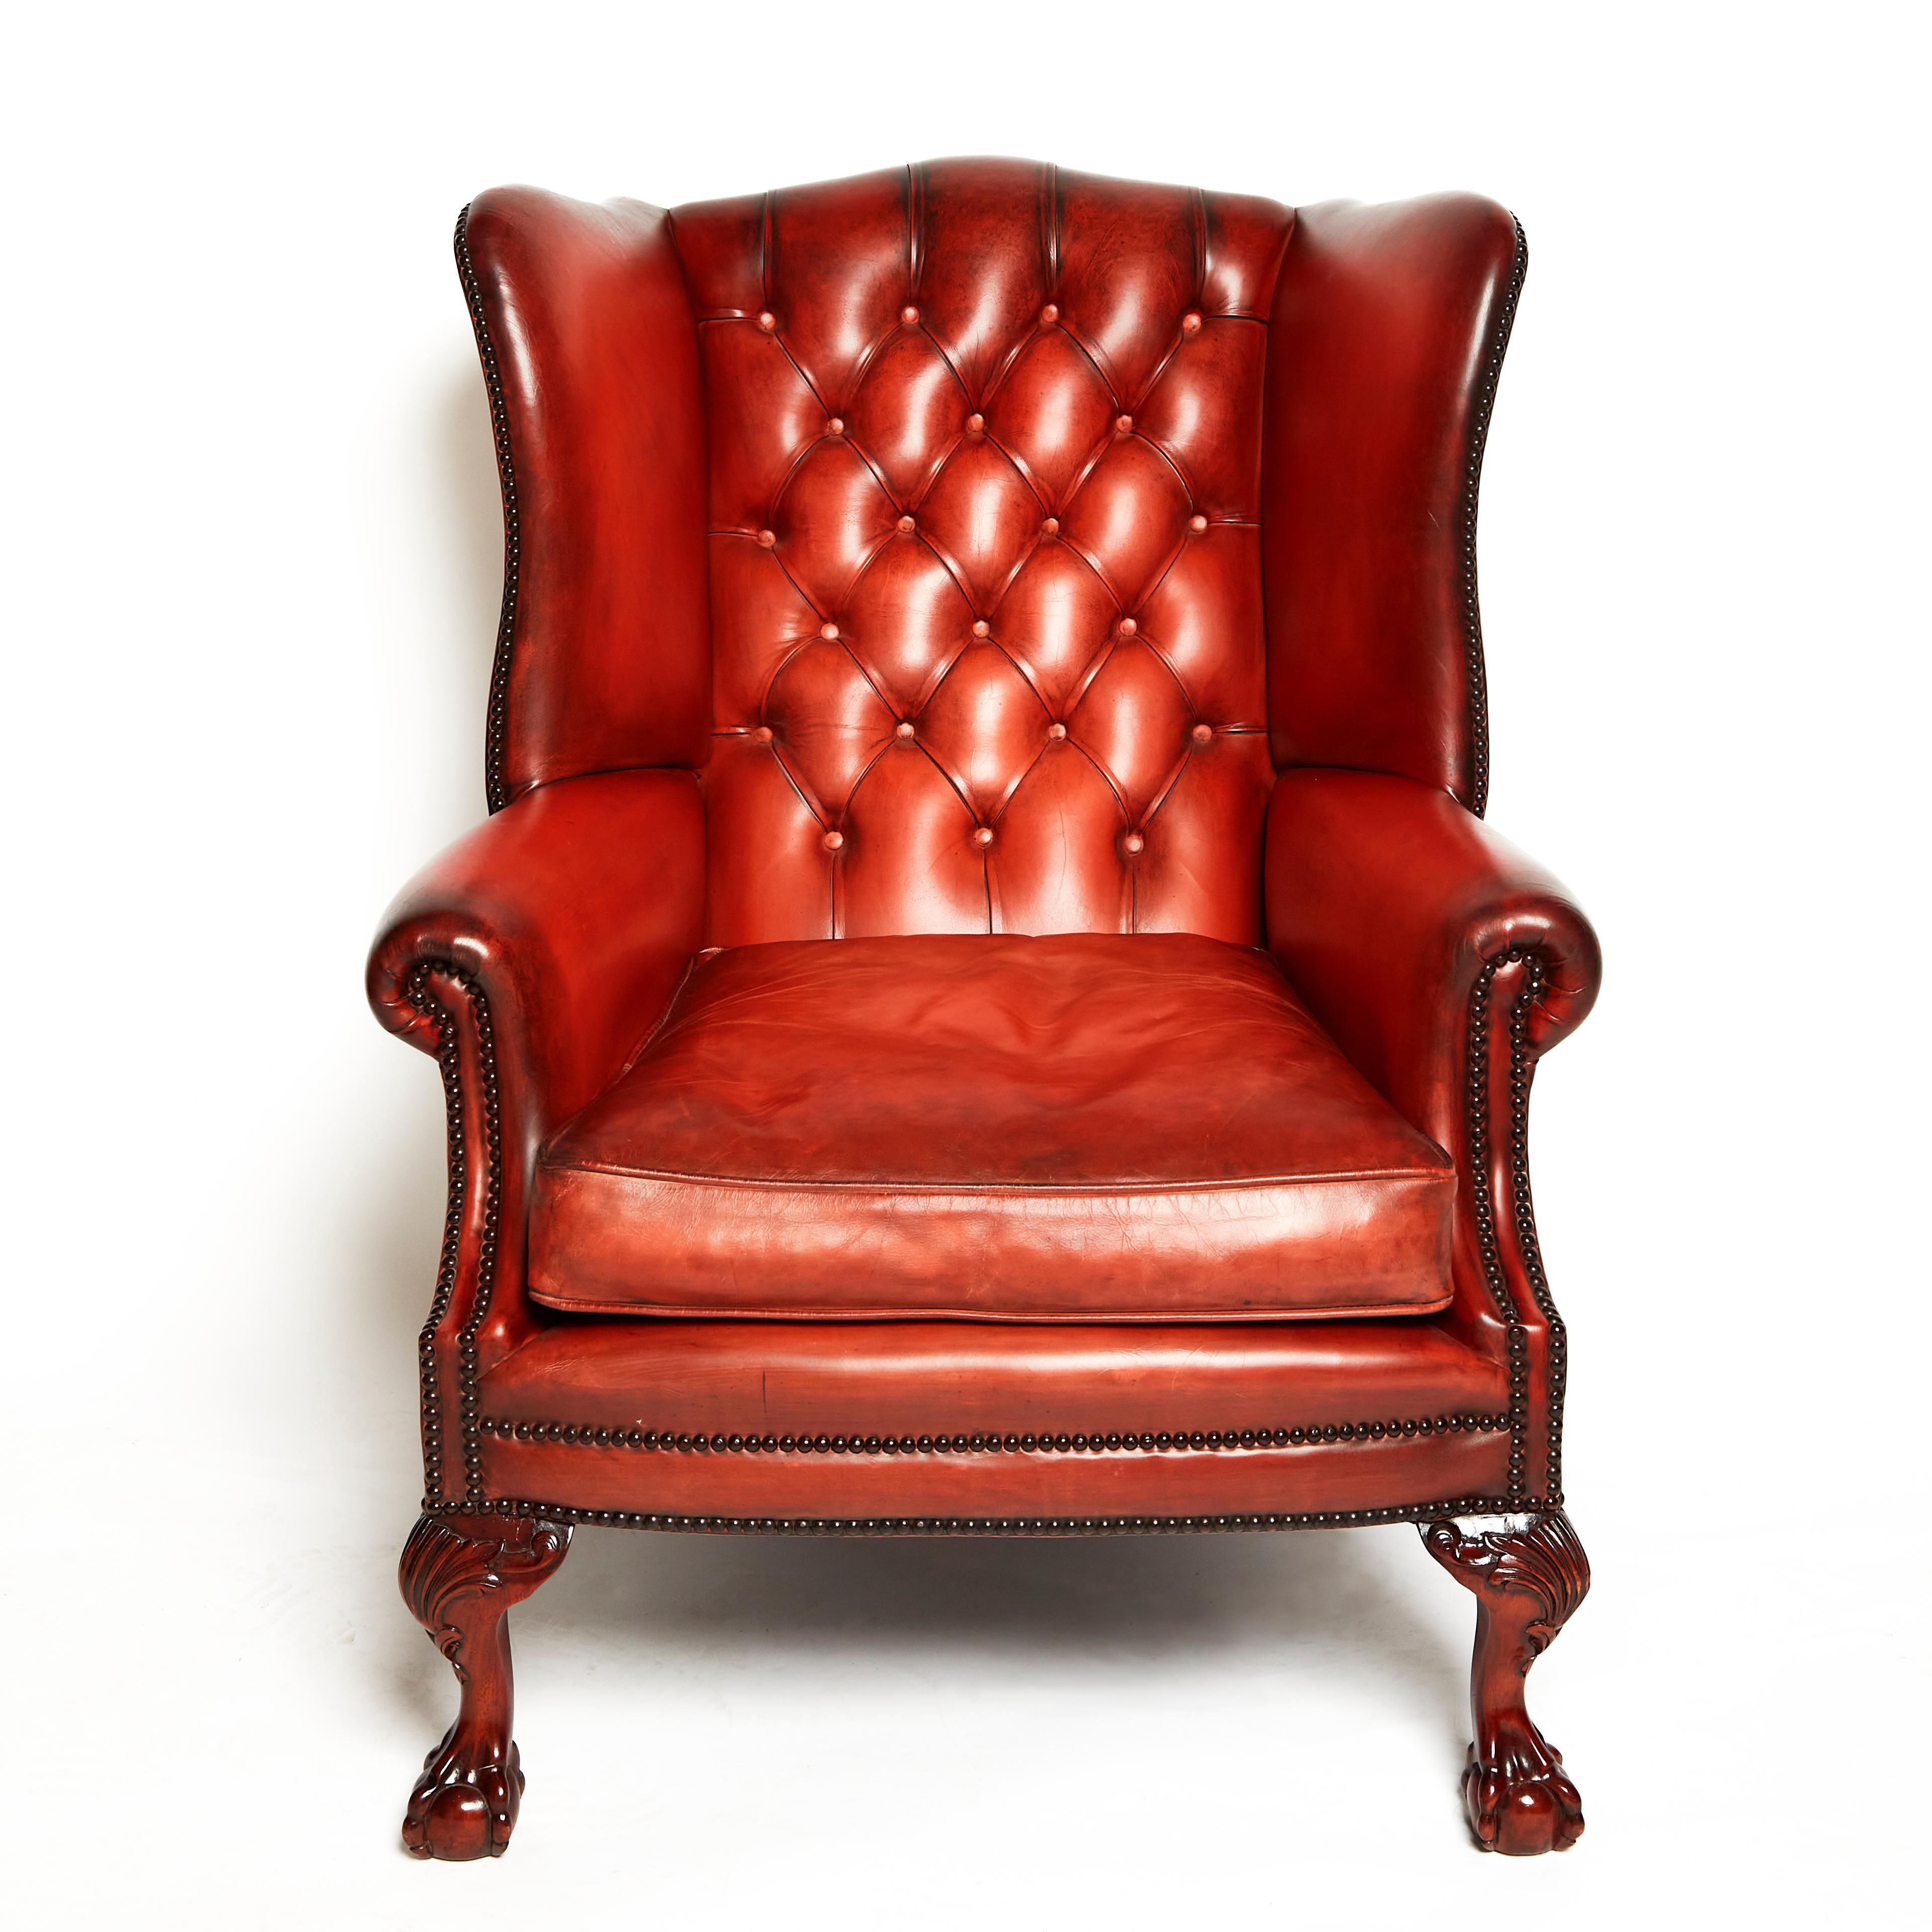 This fine quality and very handsome handmade English leather wing armchair features a ball and claw leg in the 18th century style. It has a button back and separate cushion seat made to the traditional standard. The leather is hand dyed to a to a